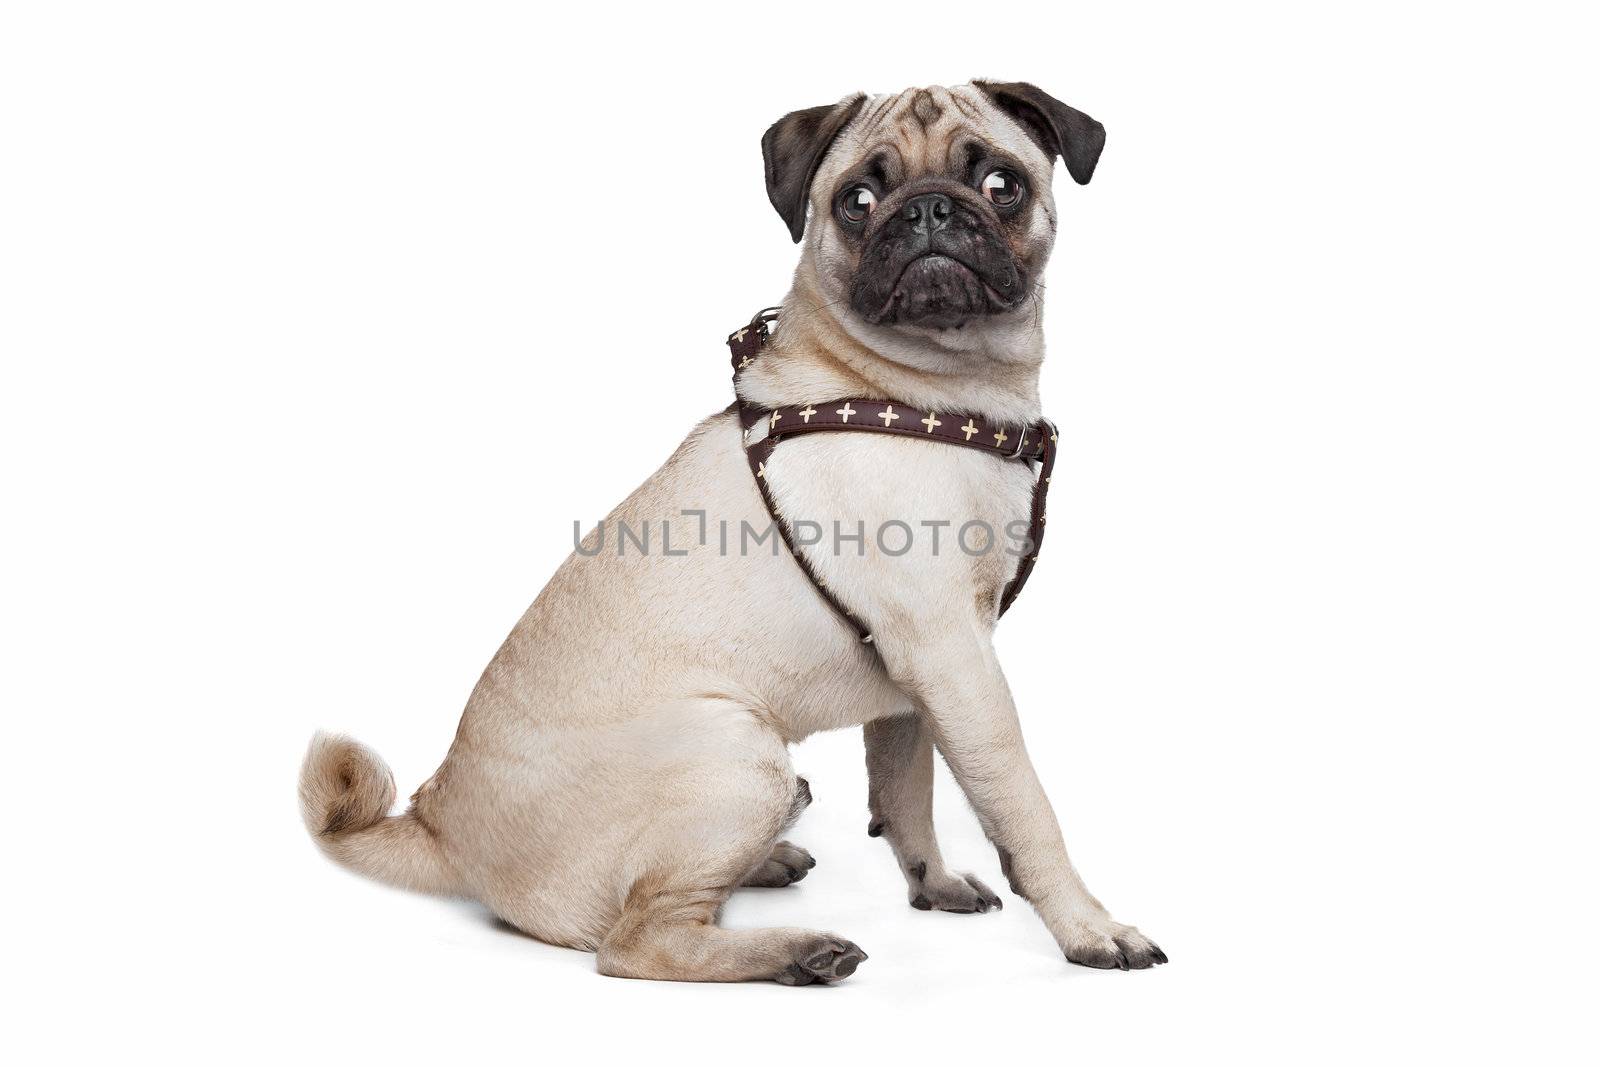 Pug dog in front of a white background